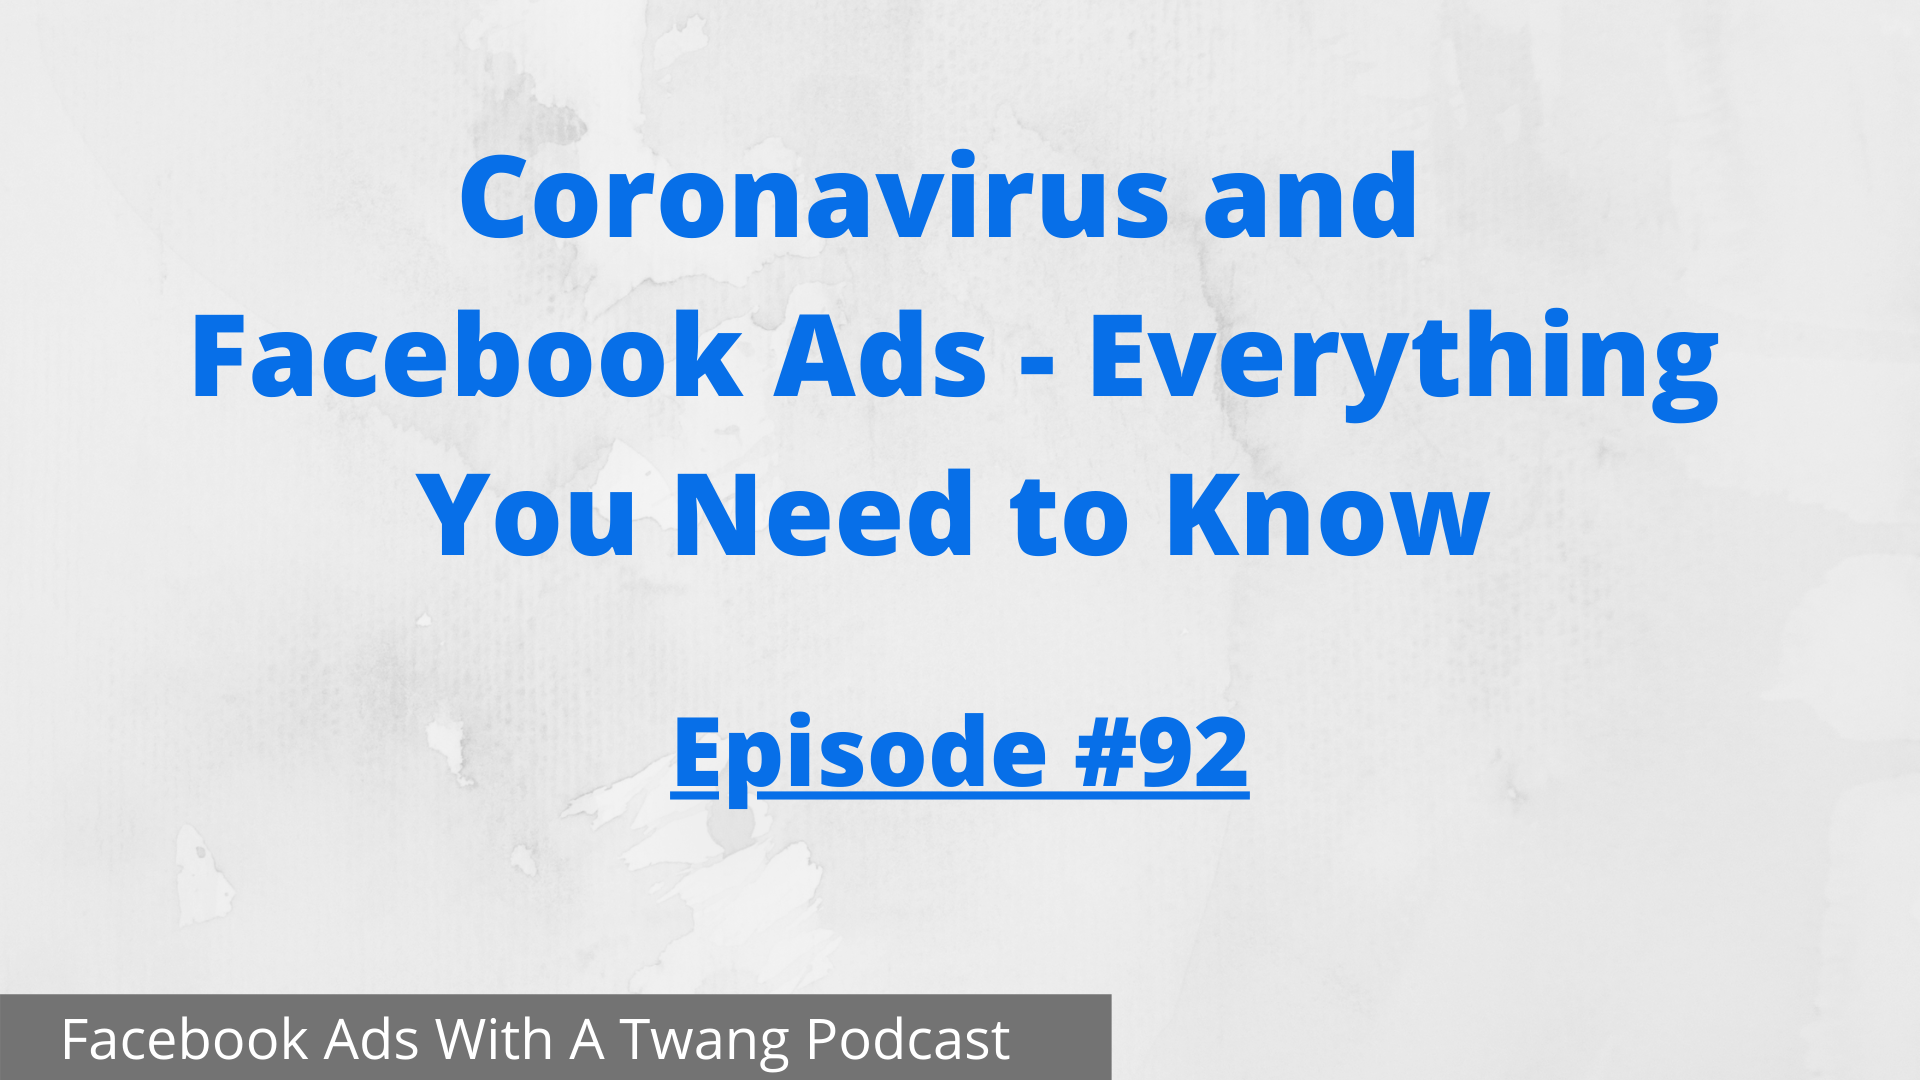 Coronavirus and Facebook Ads - Everything You Need to Know